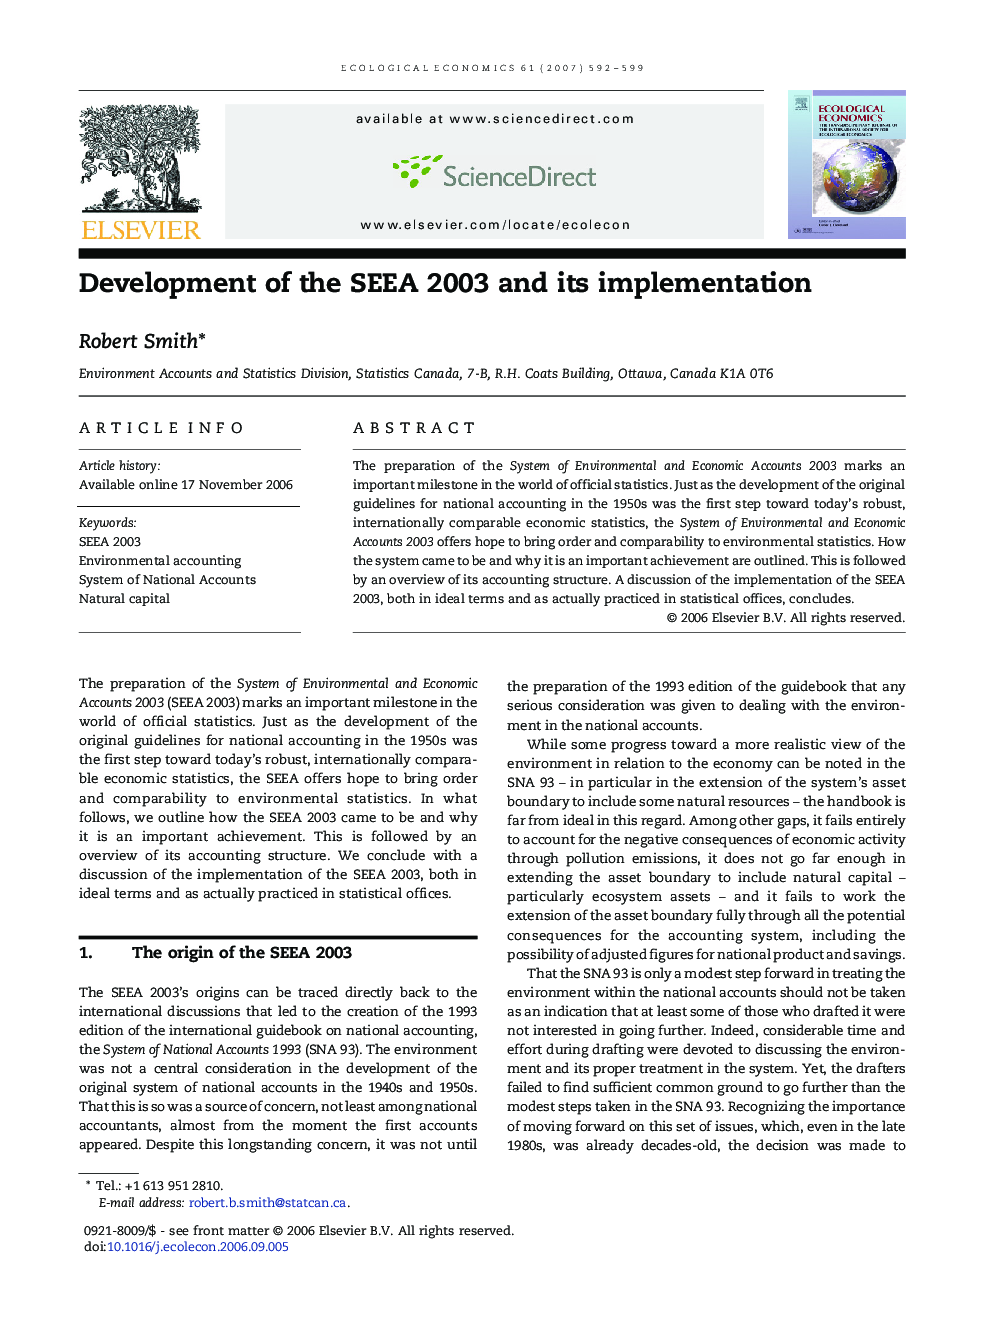 Development of the SEEA 2003 and its implementation